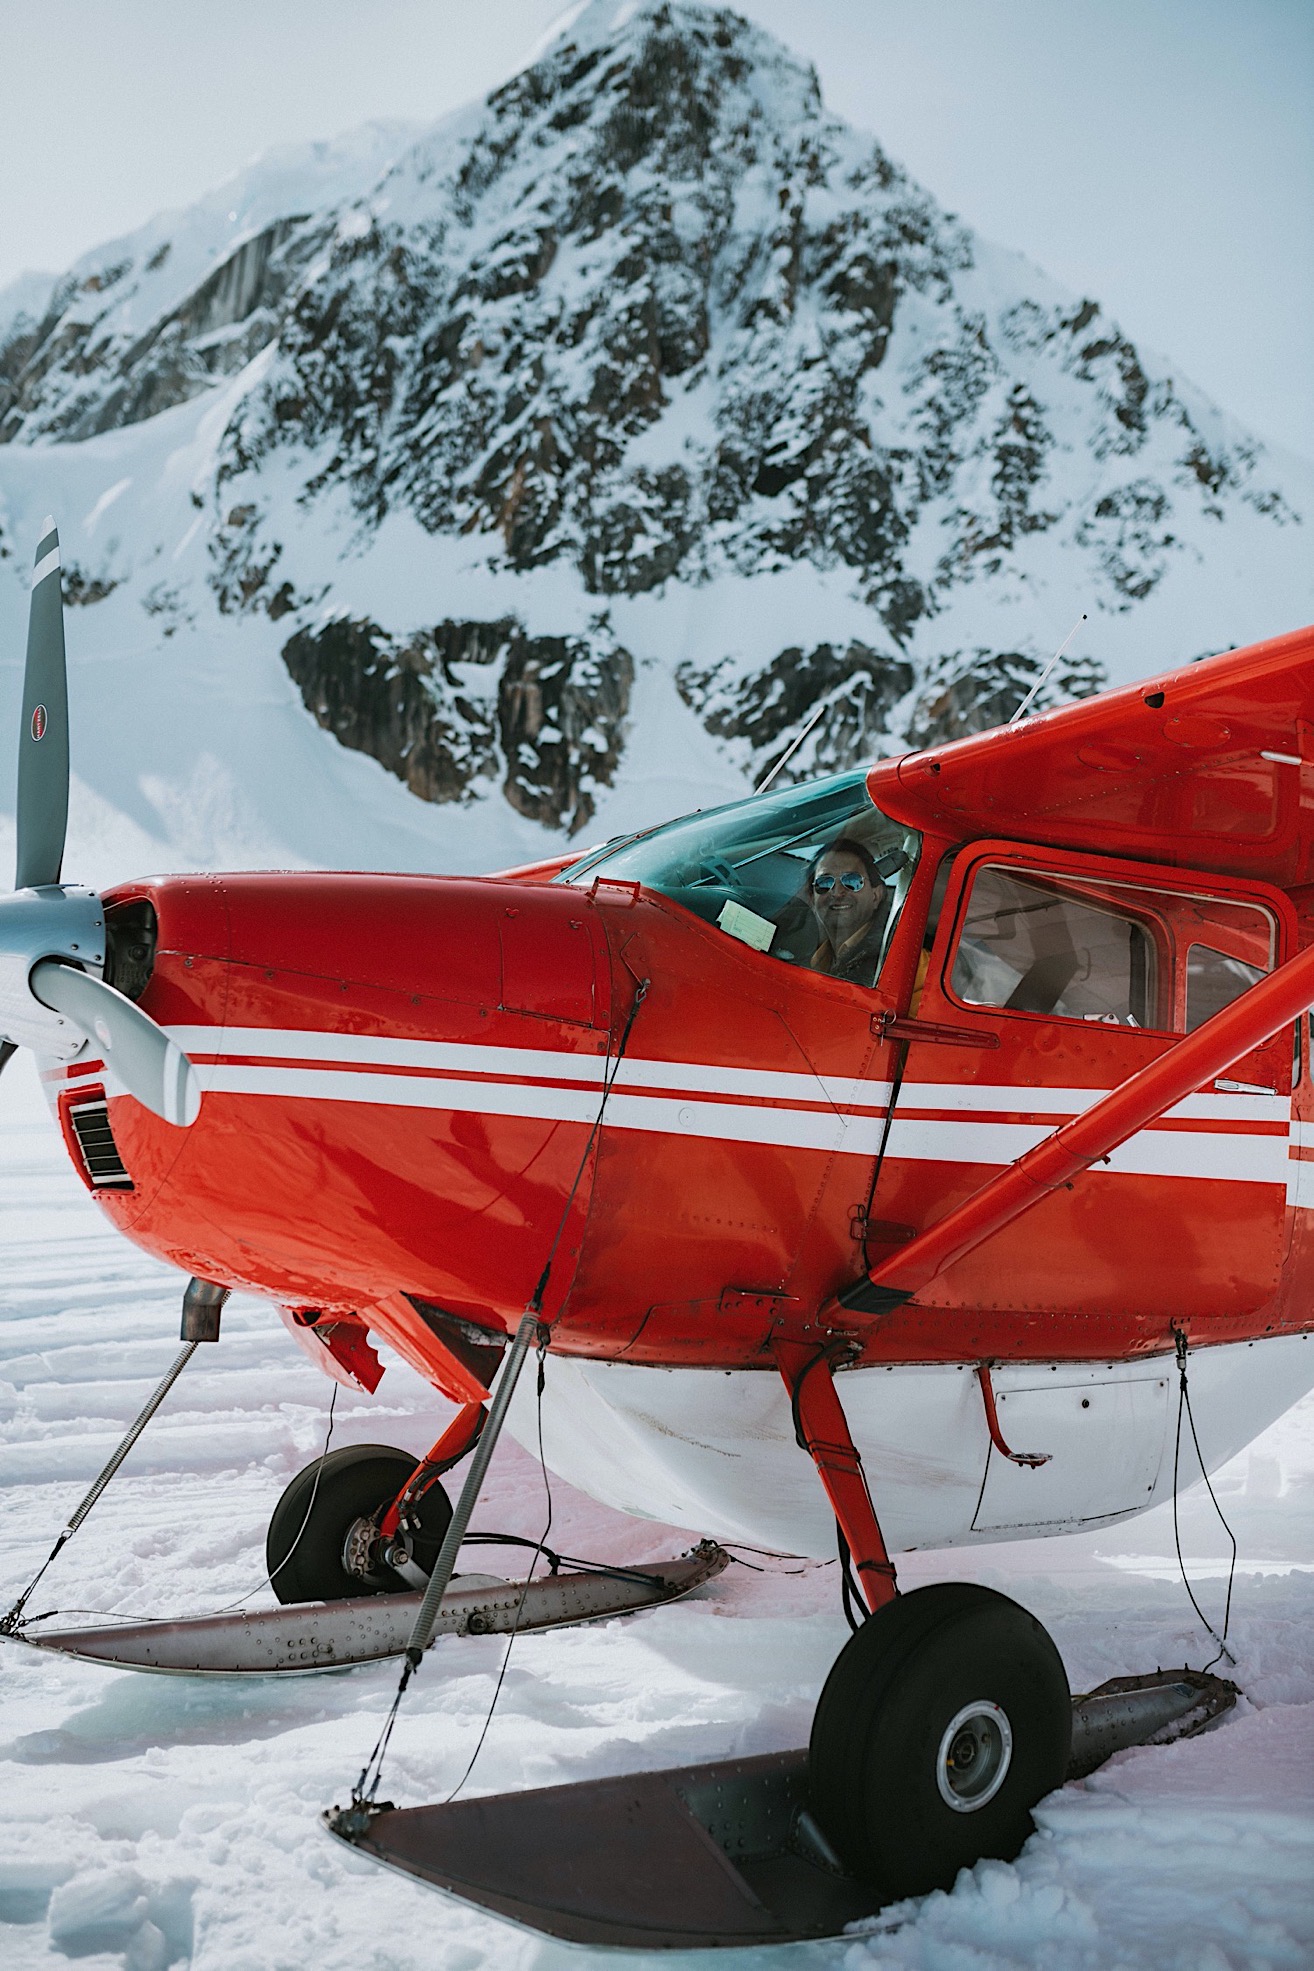 Photo of a groom sitting inside a red plane